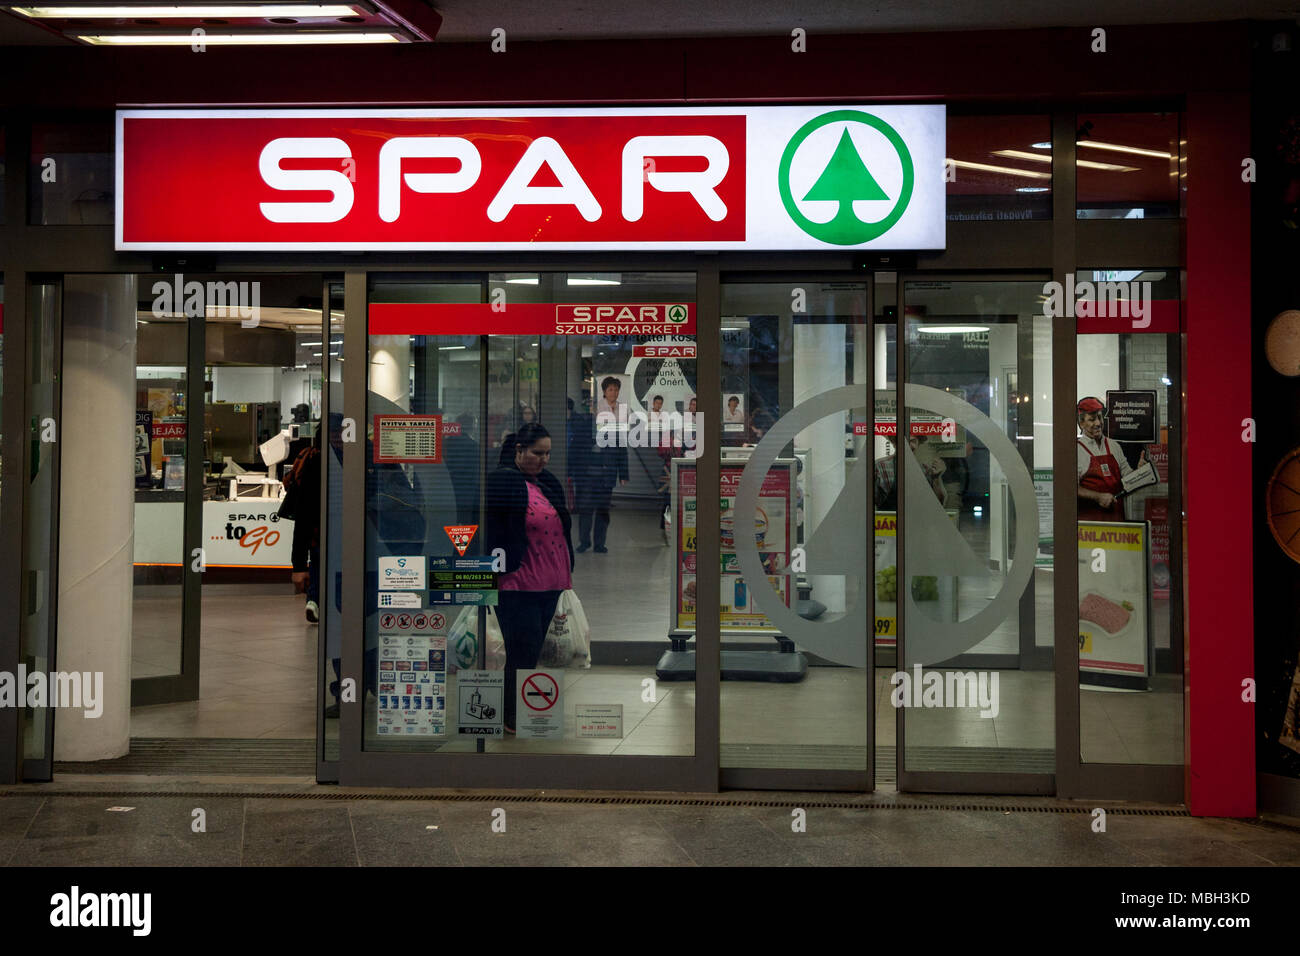 BUDAPEST, HUNGARY - APRIL 6, 2018: Spar logo on one of their Supermarkets. Spar is a Dutch franchise of retailers and wholesalers, operating worldwide Stock Photo